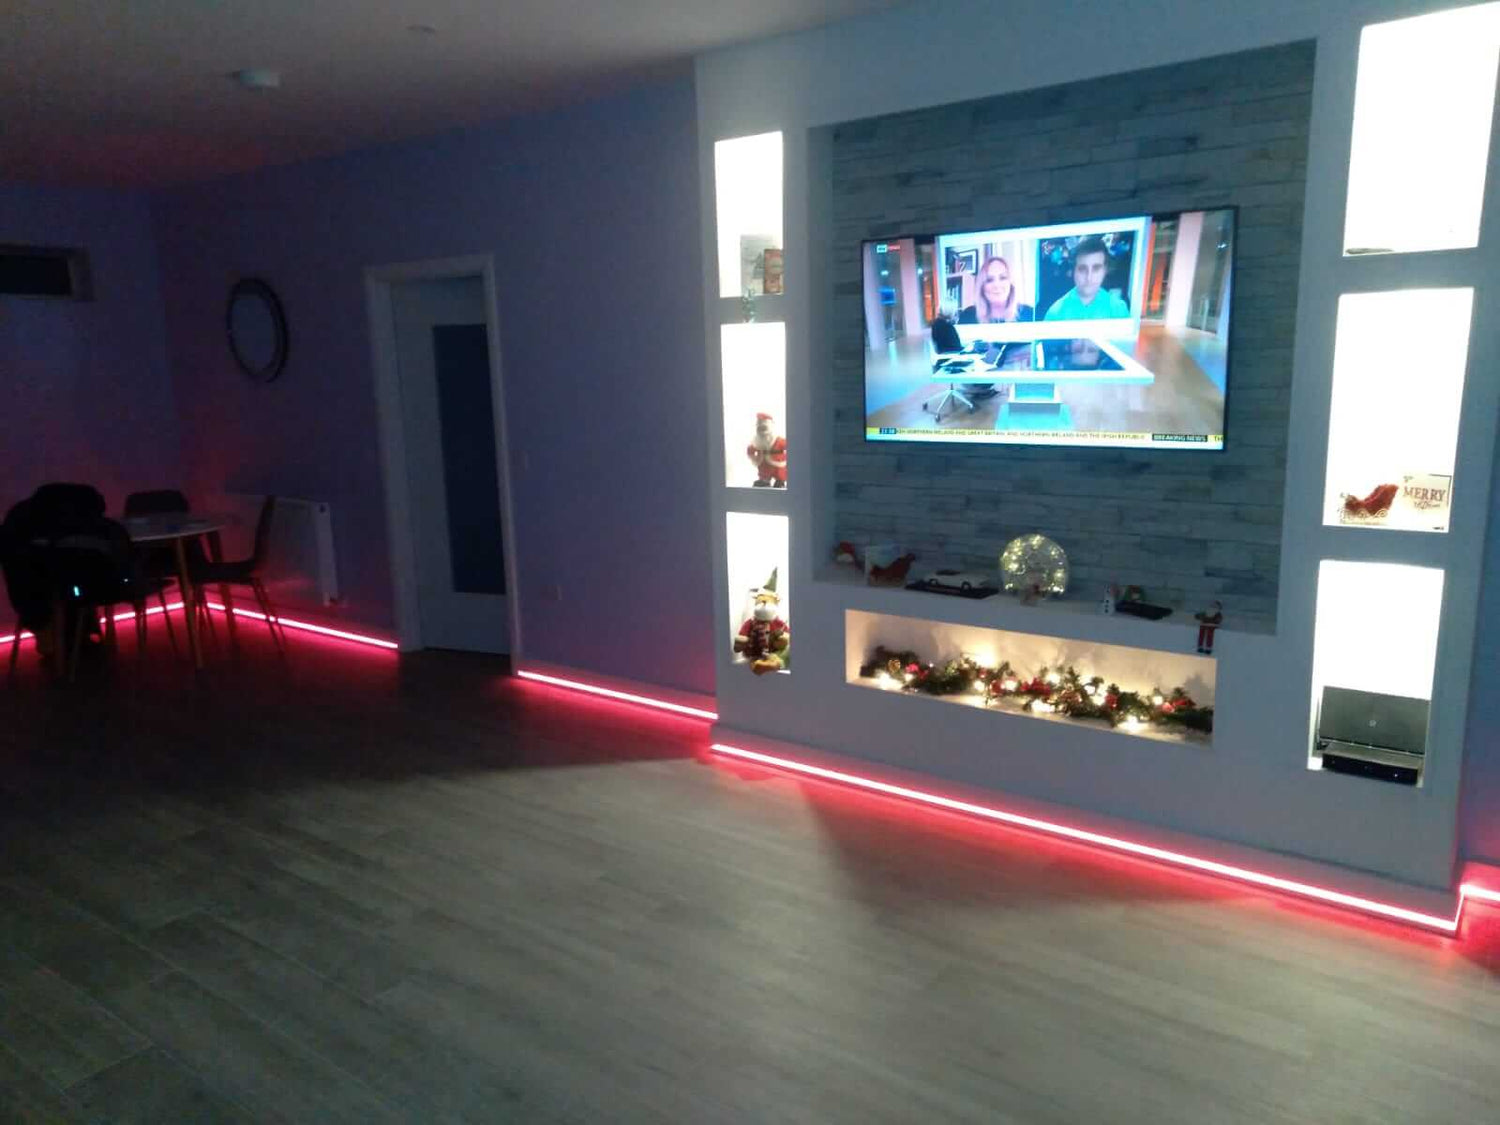 QL040P - Skirting Board lit up in red